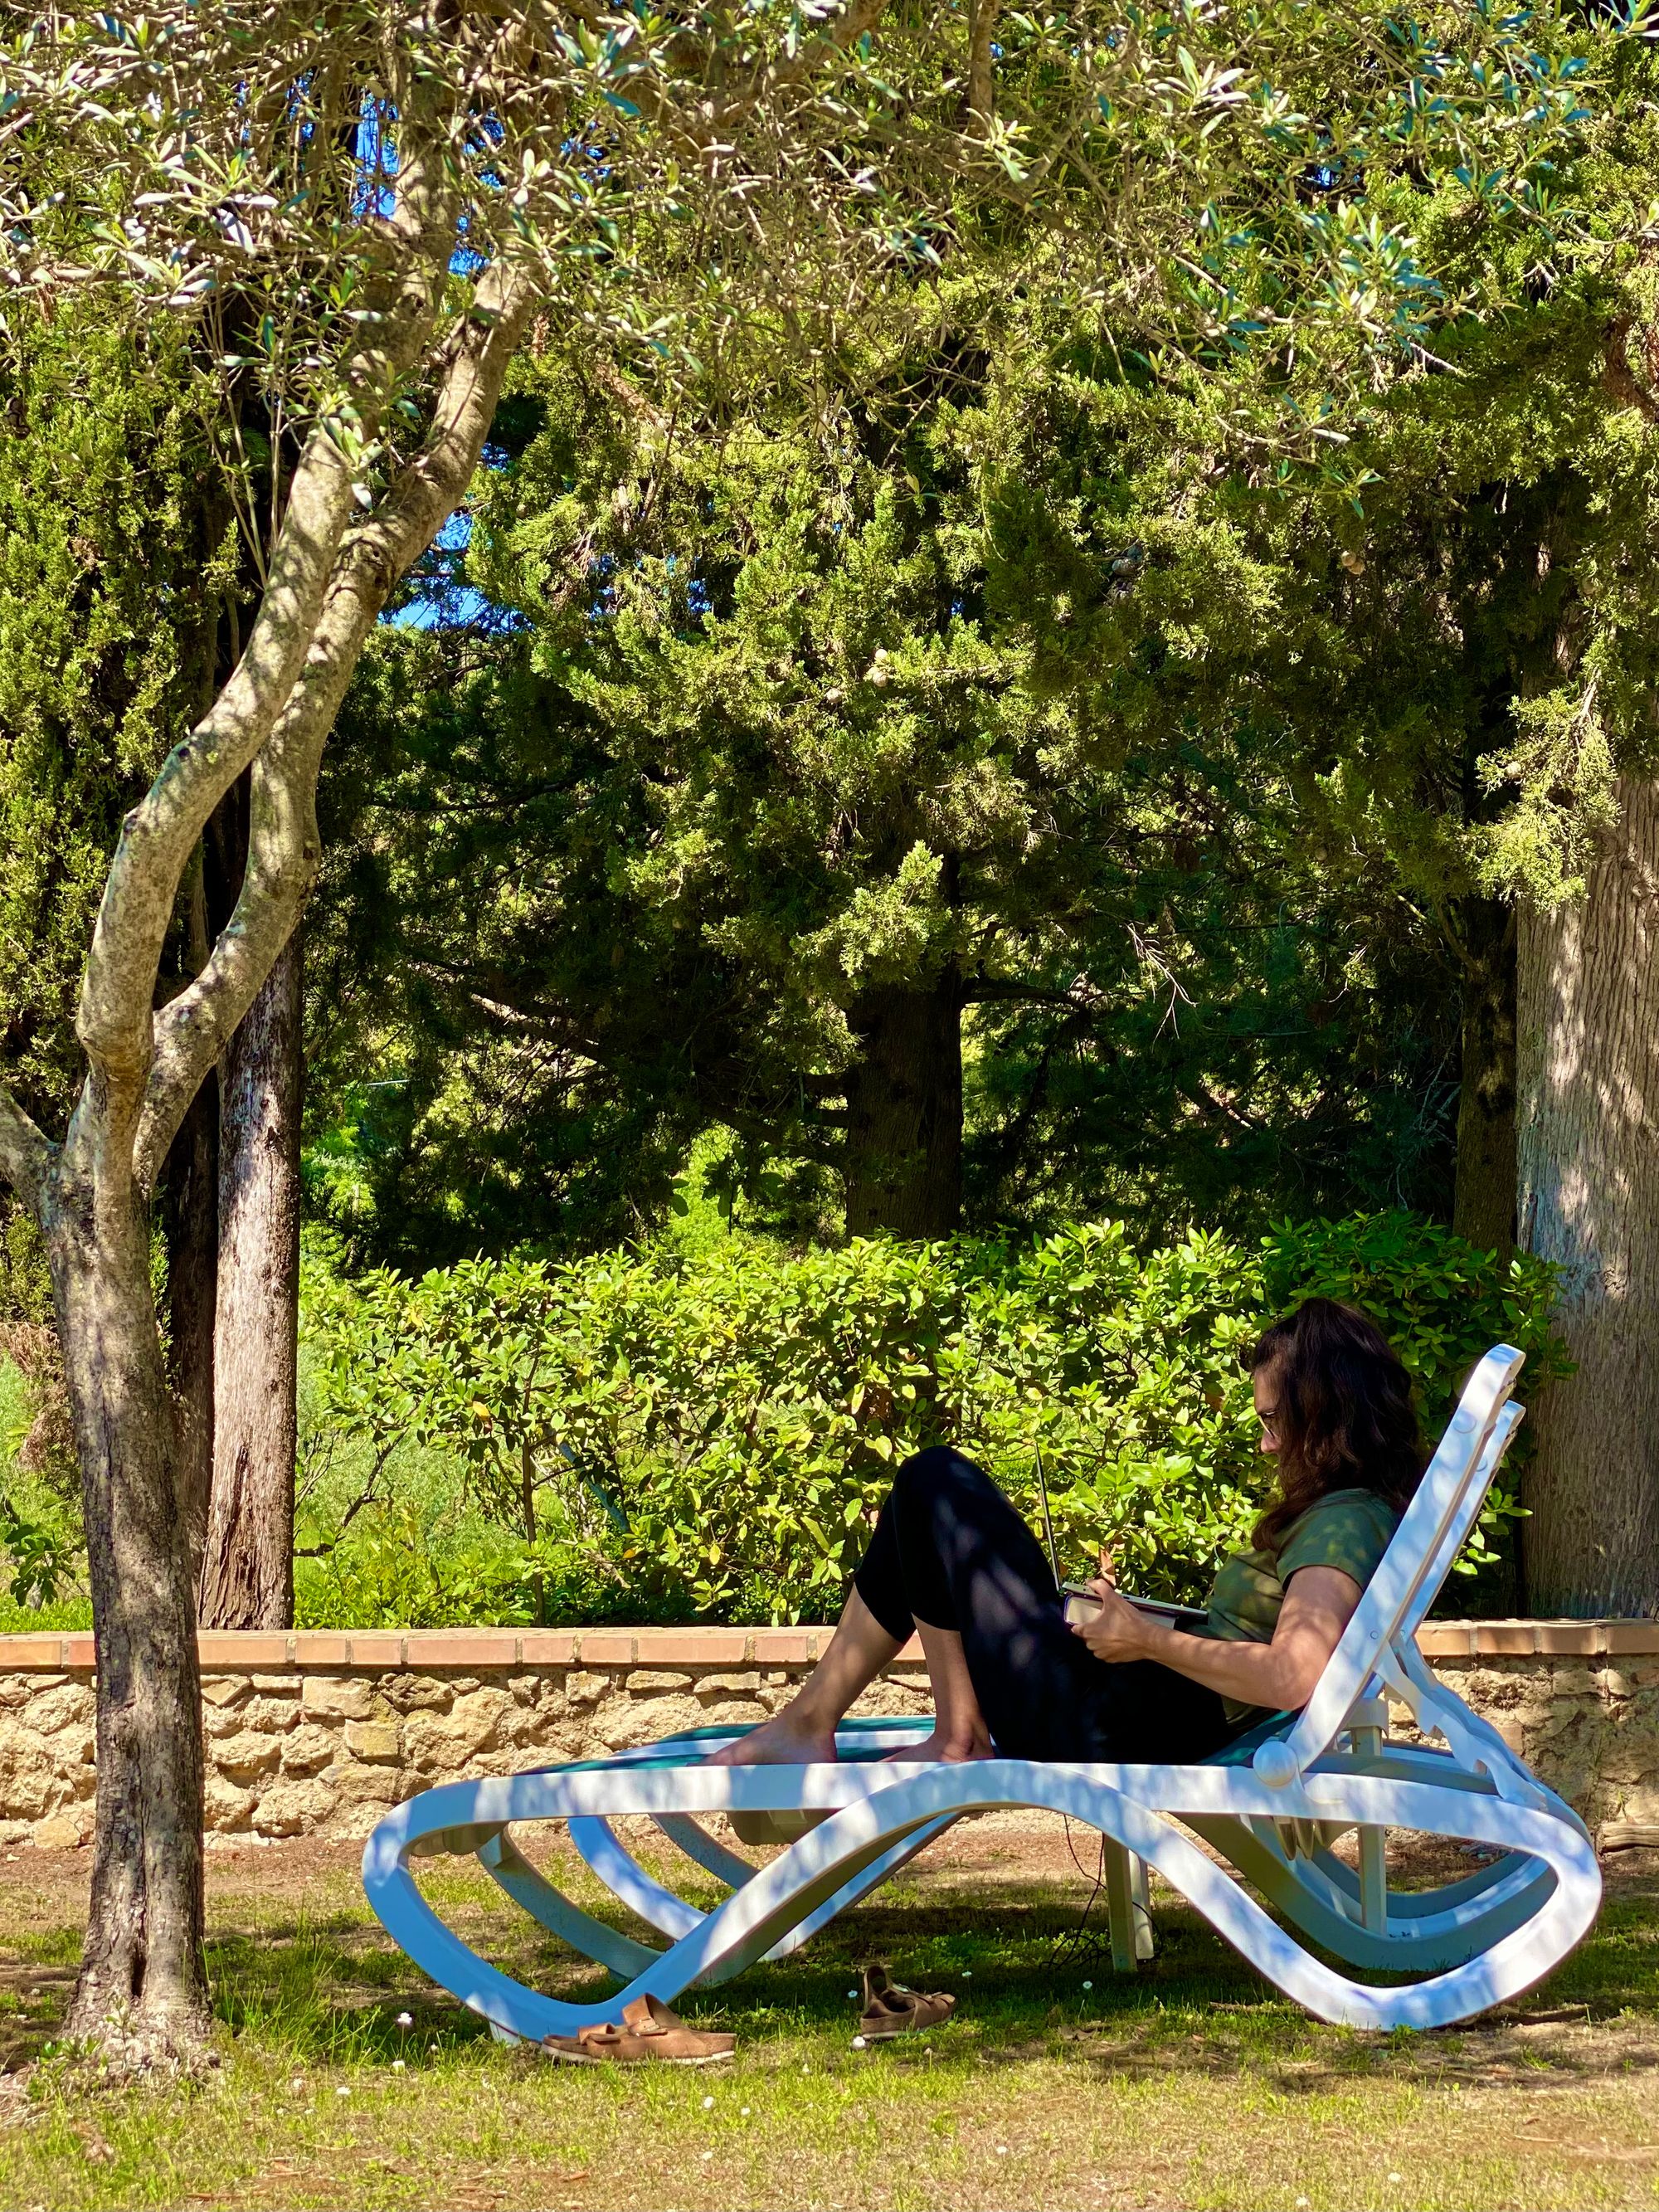 My wife relaxing in the backyard of Hotel Pescille - San Gimignano, Italy